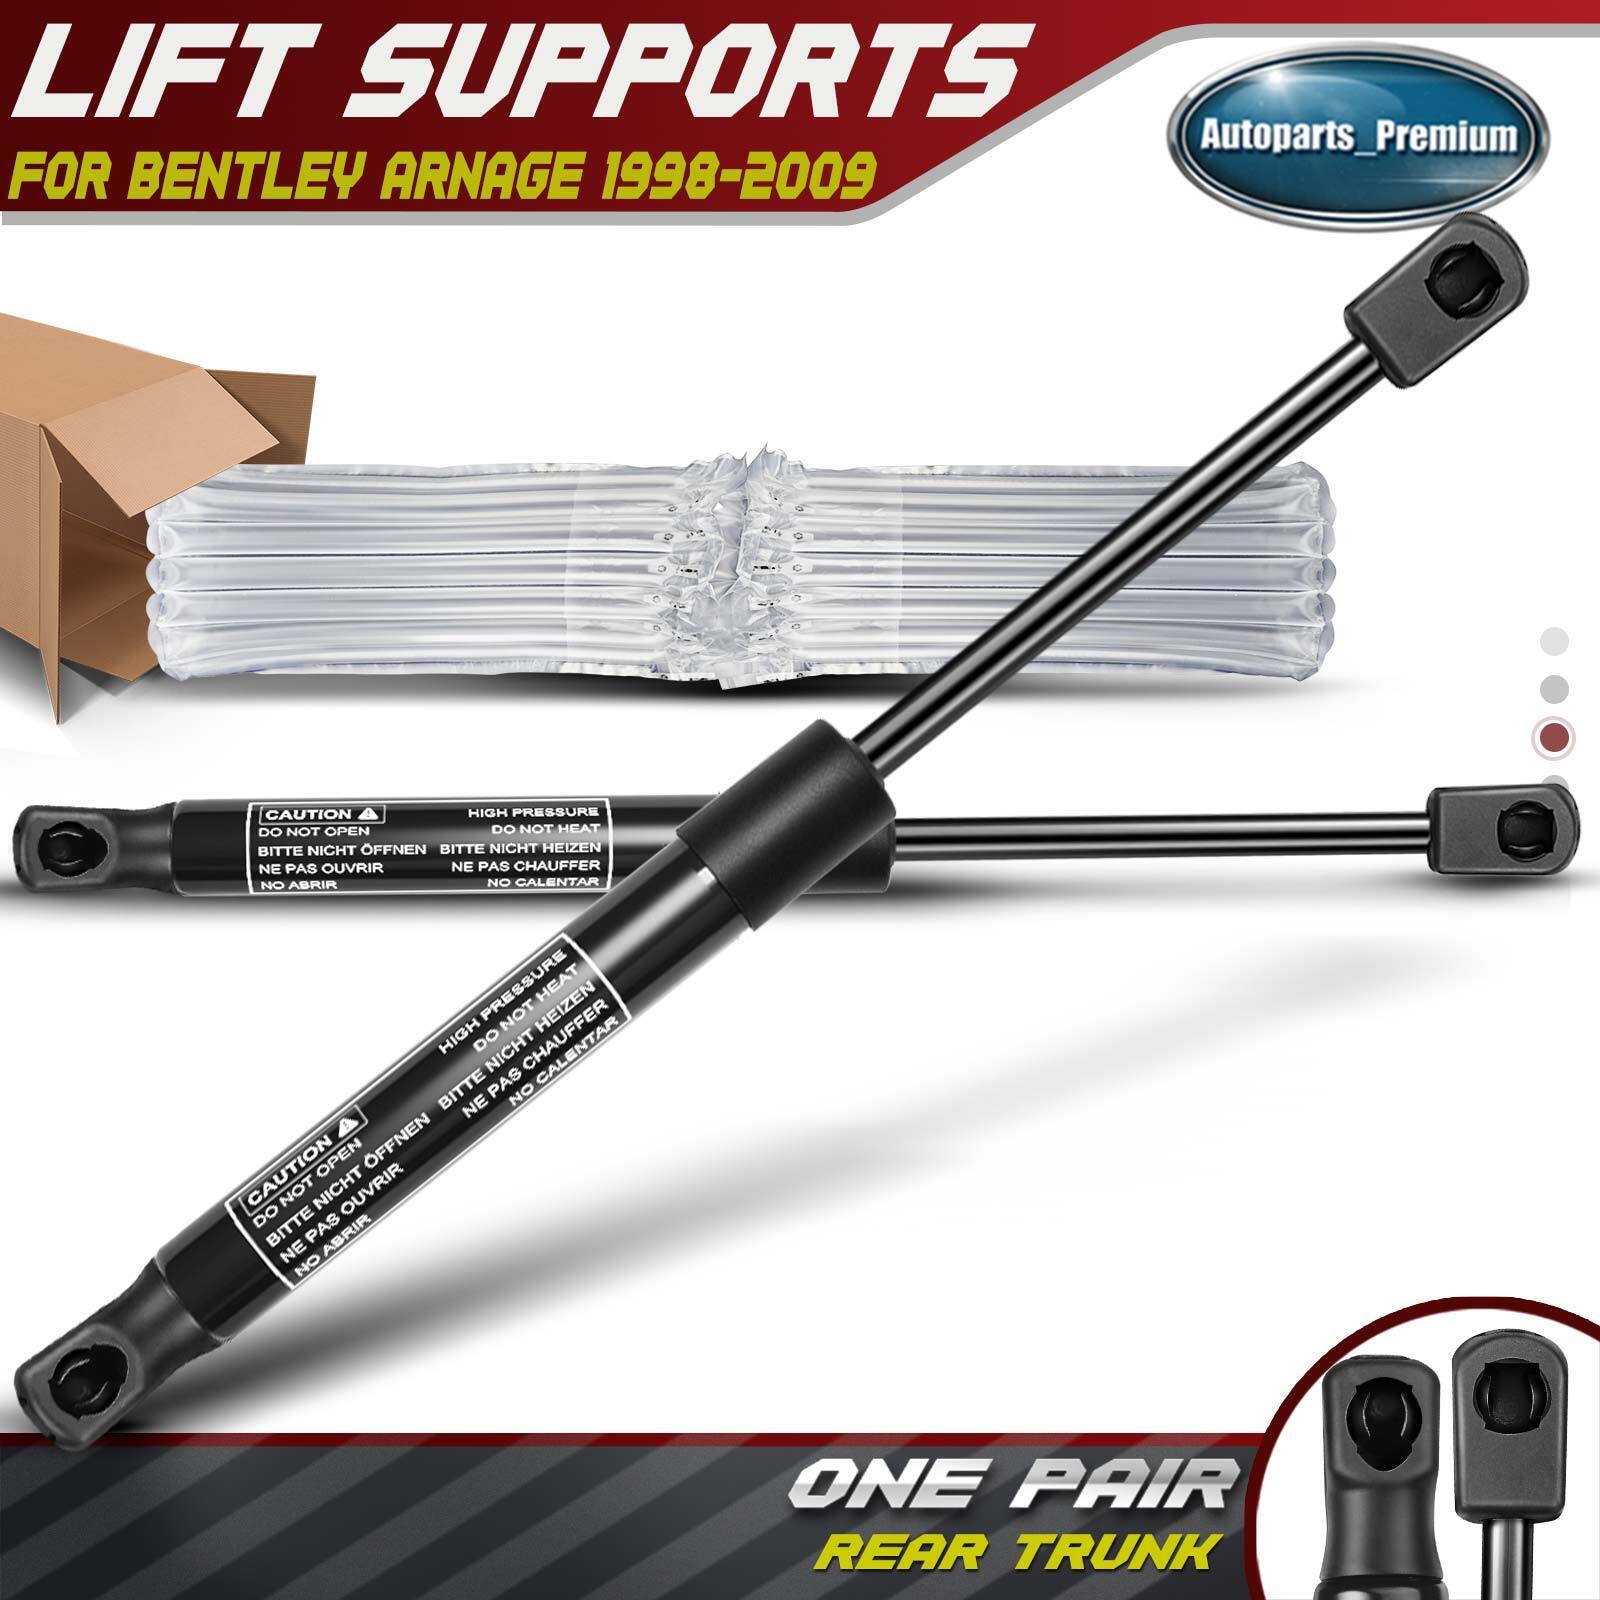 2Pcs Rear Trunk Tailgate Lift Support Struts for Bentley Arnage 1998 1999-2009